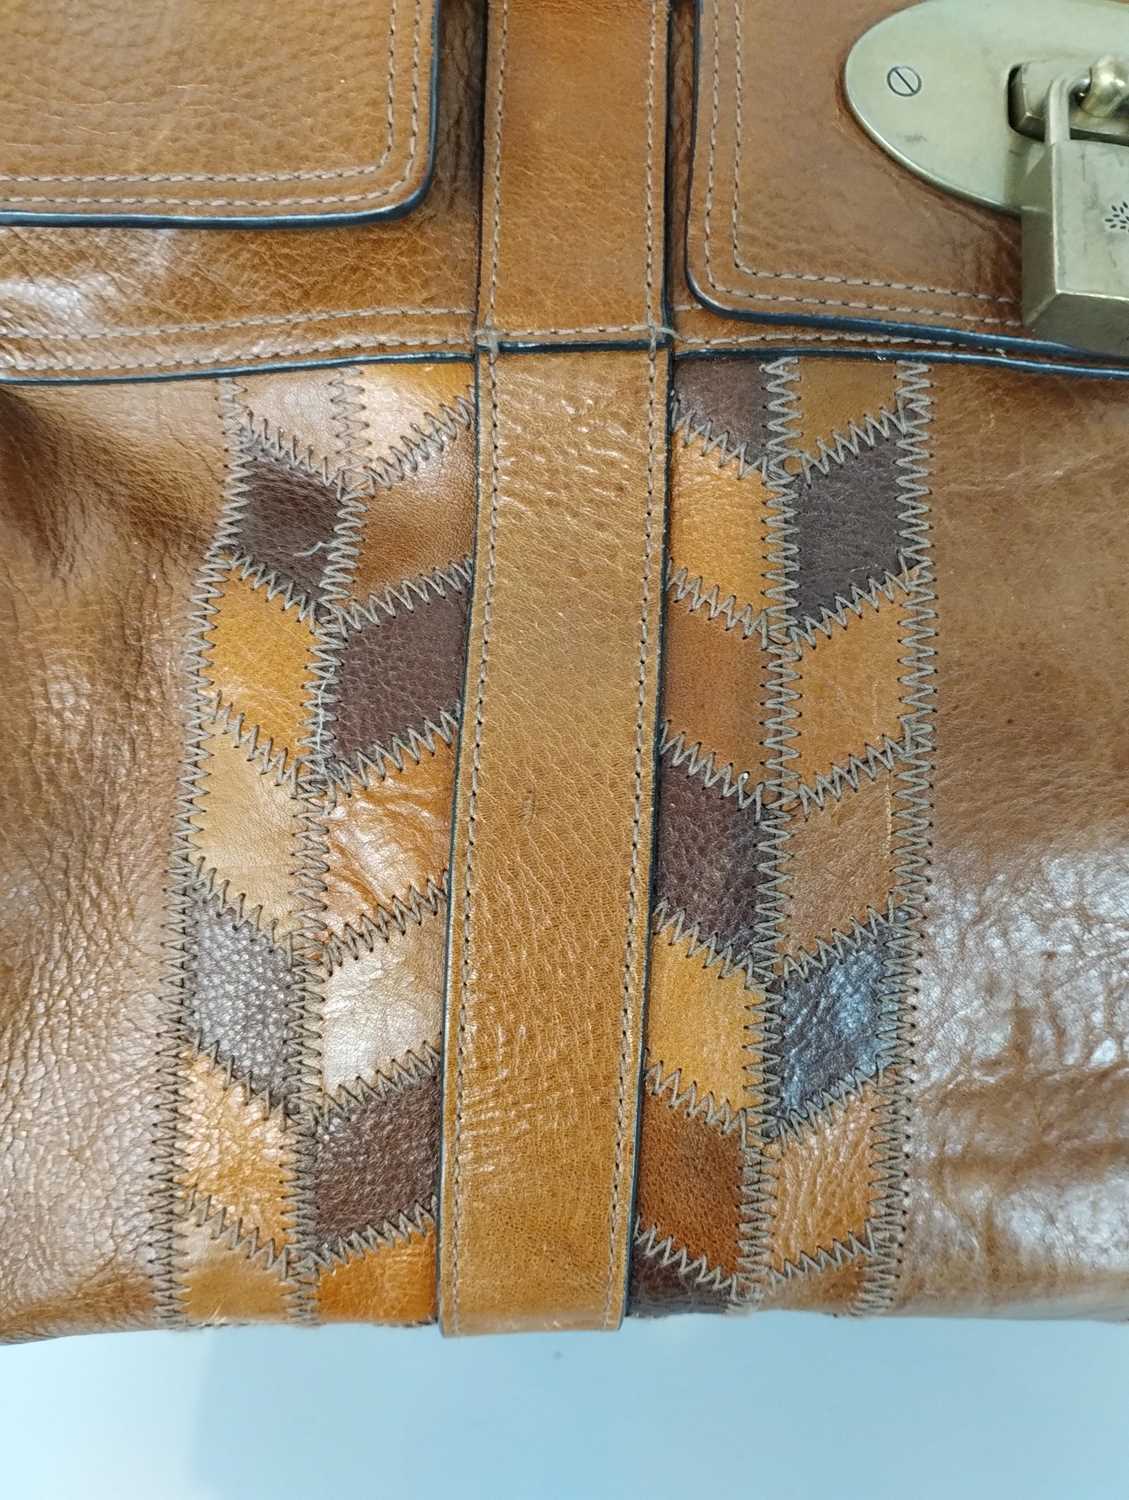 Mulberry Tan Leather Bayswater Rio Patchwork Bag with brass hardware, adjustable tabs and buckles, - Image 7 of 11